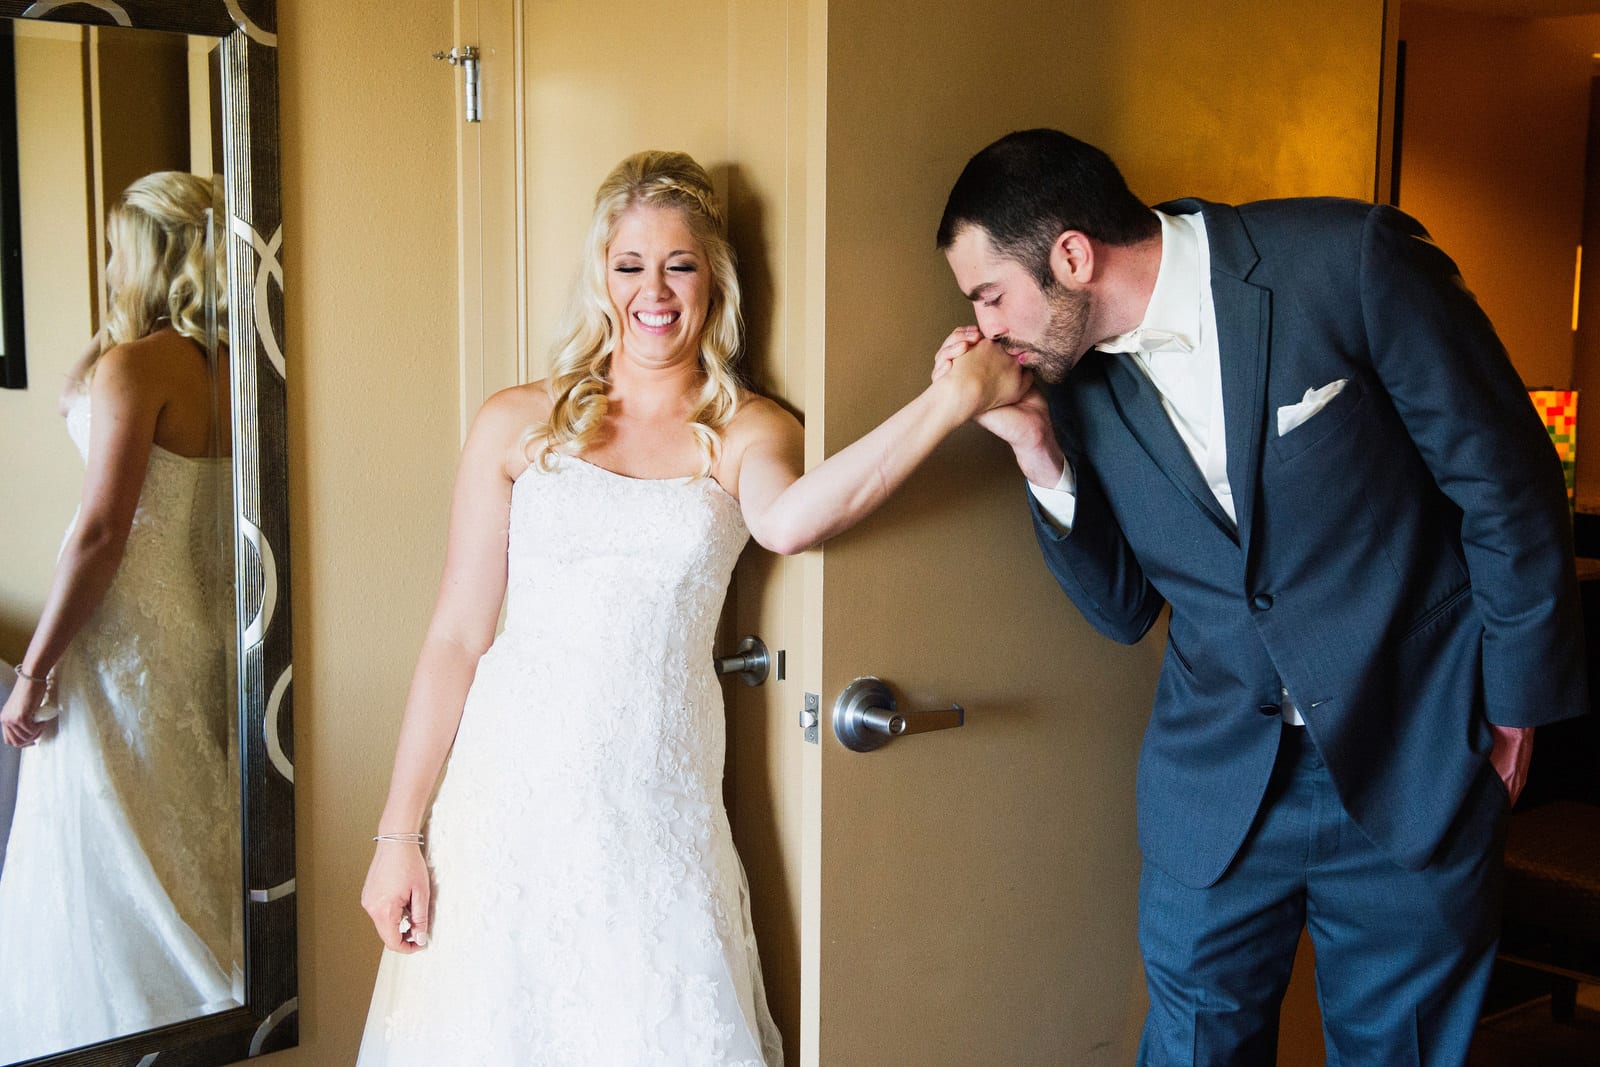 A bride smiles as her husband-to-be kisses her hand from around the corner of a door because they didn't want to see each other before their wedding at the Embassy Suites near the airport before their wedding.